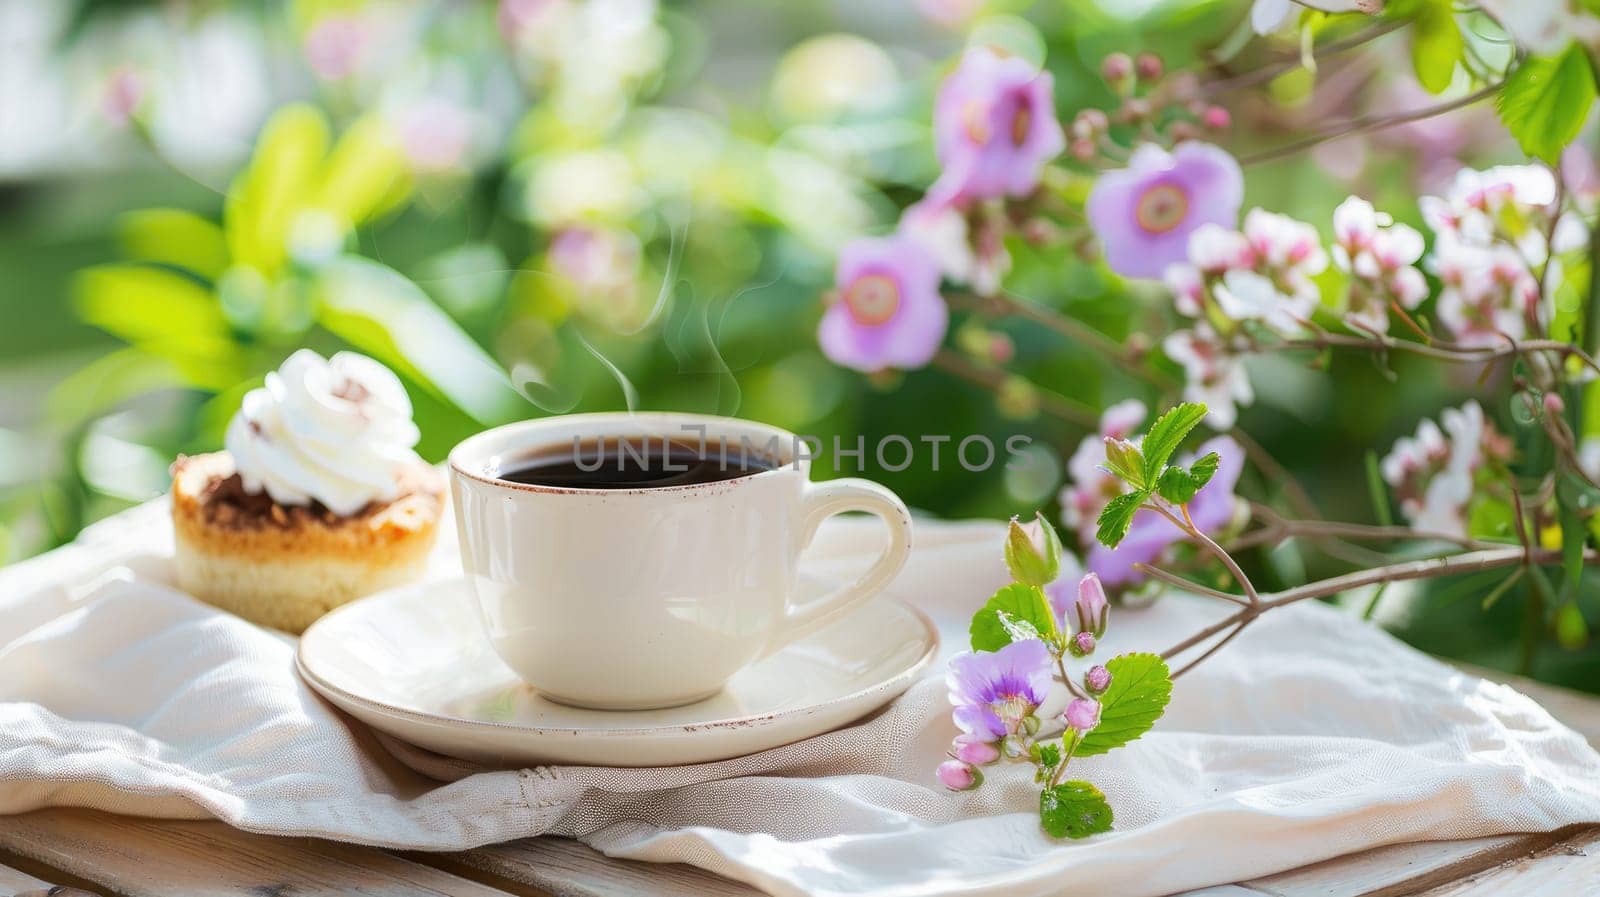 A cup of coffee on a table with a small cake for a snack in a flower garden.